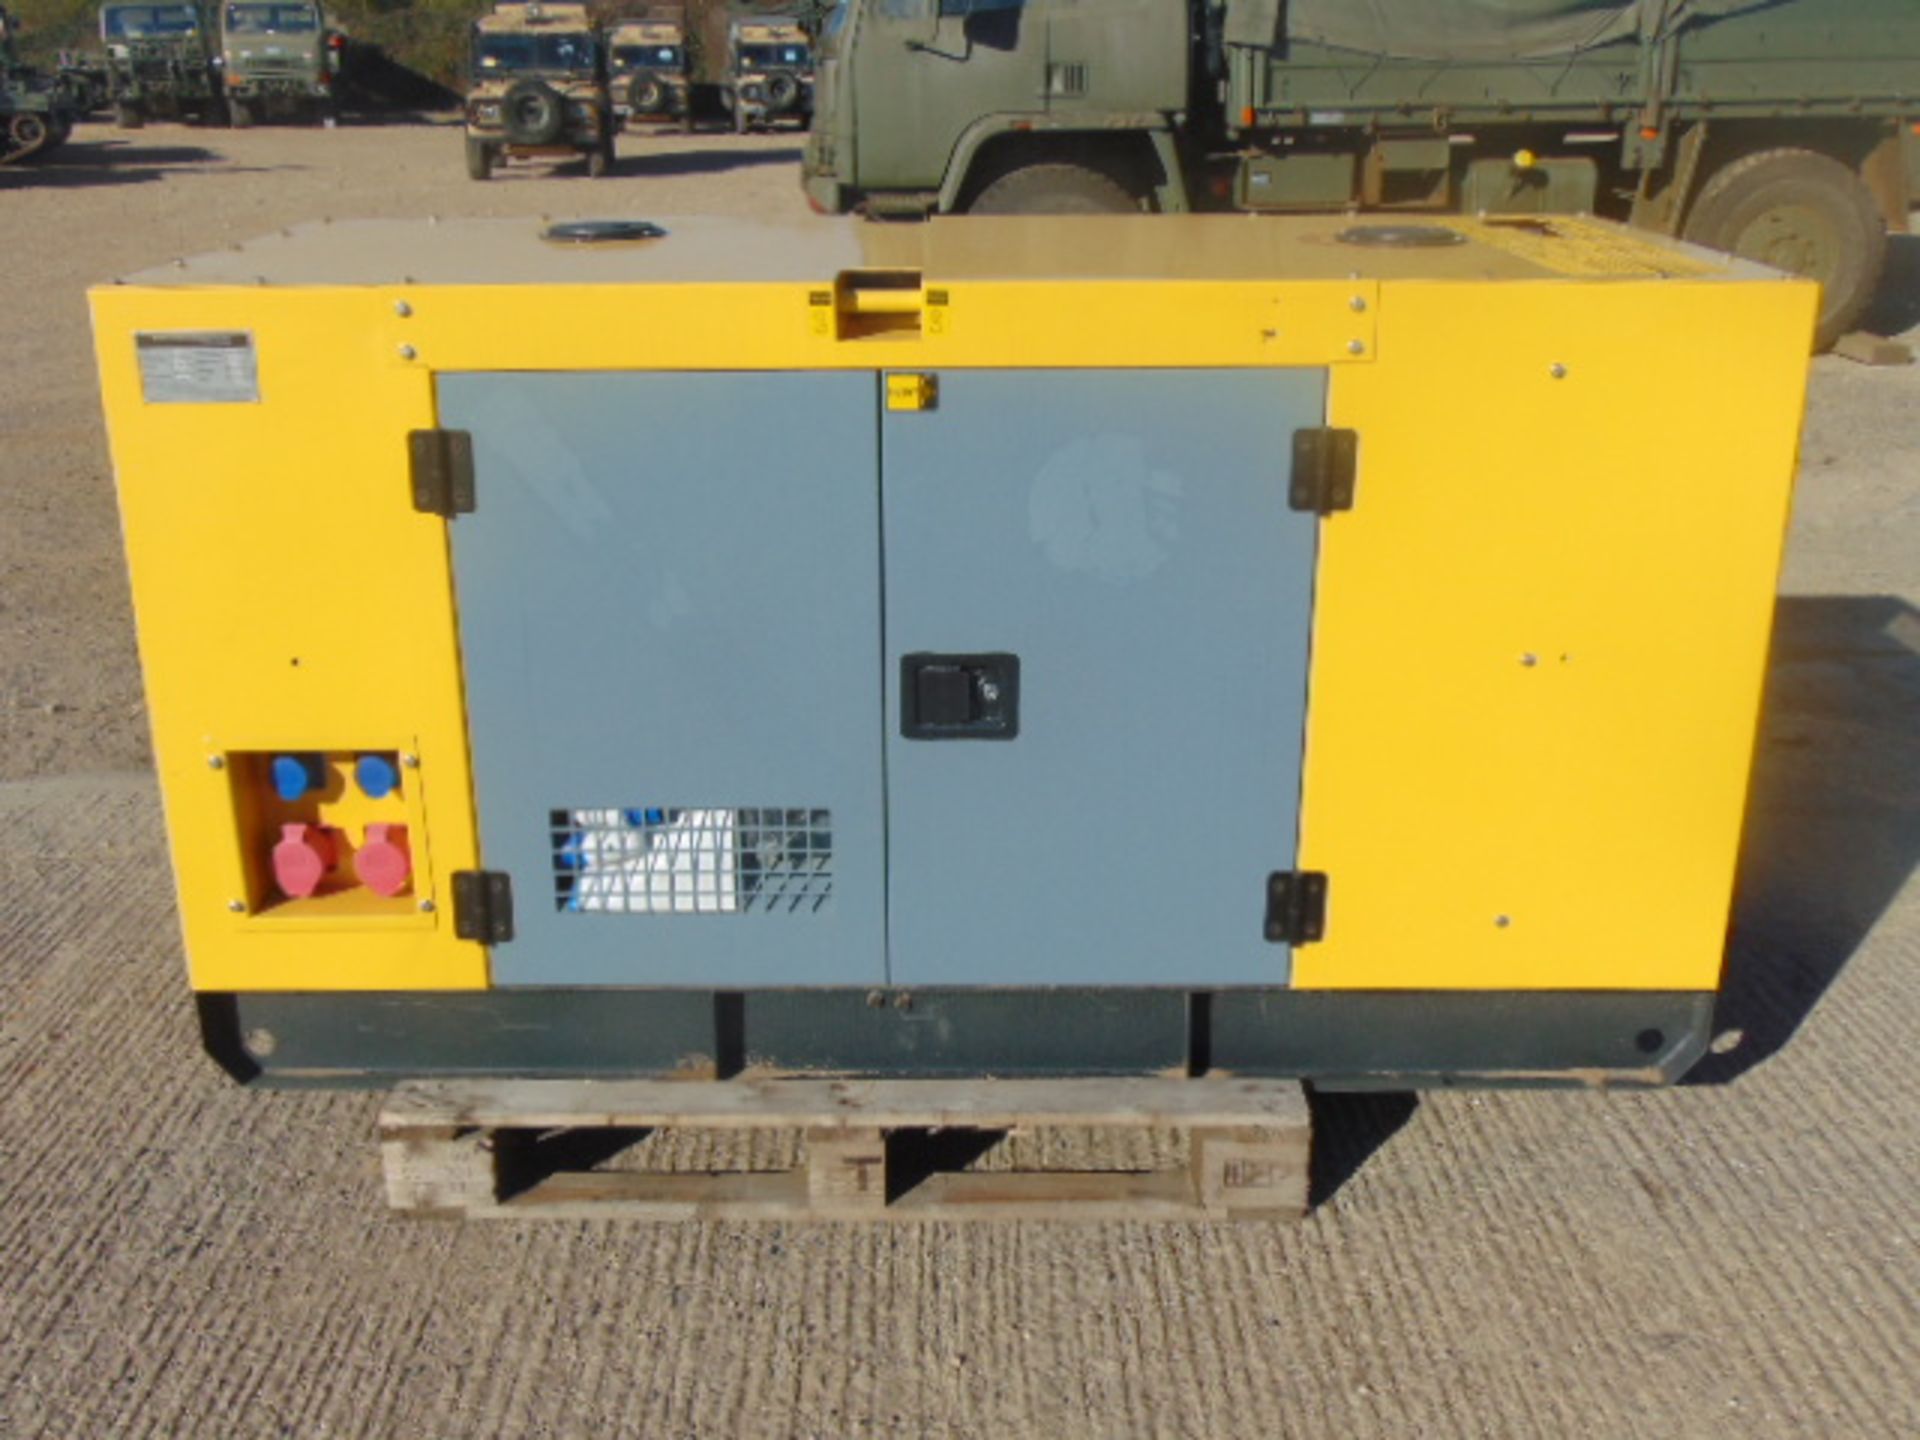 UNISSUED WITH TEST HOURS ONLY 25 KVA 3 Phase Silent Diesel Generator Set